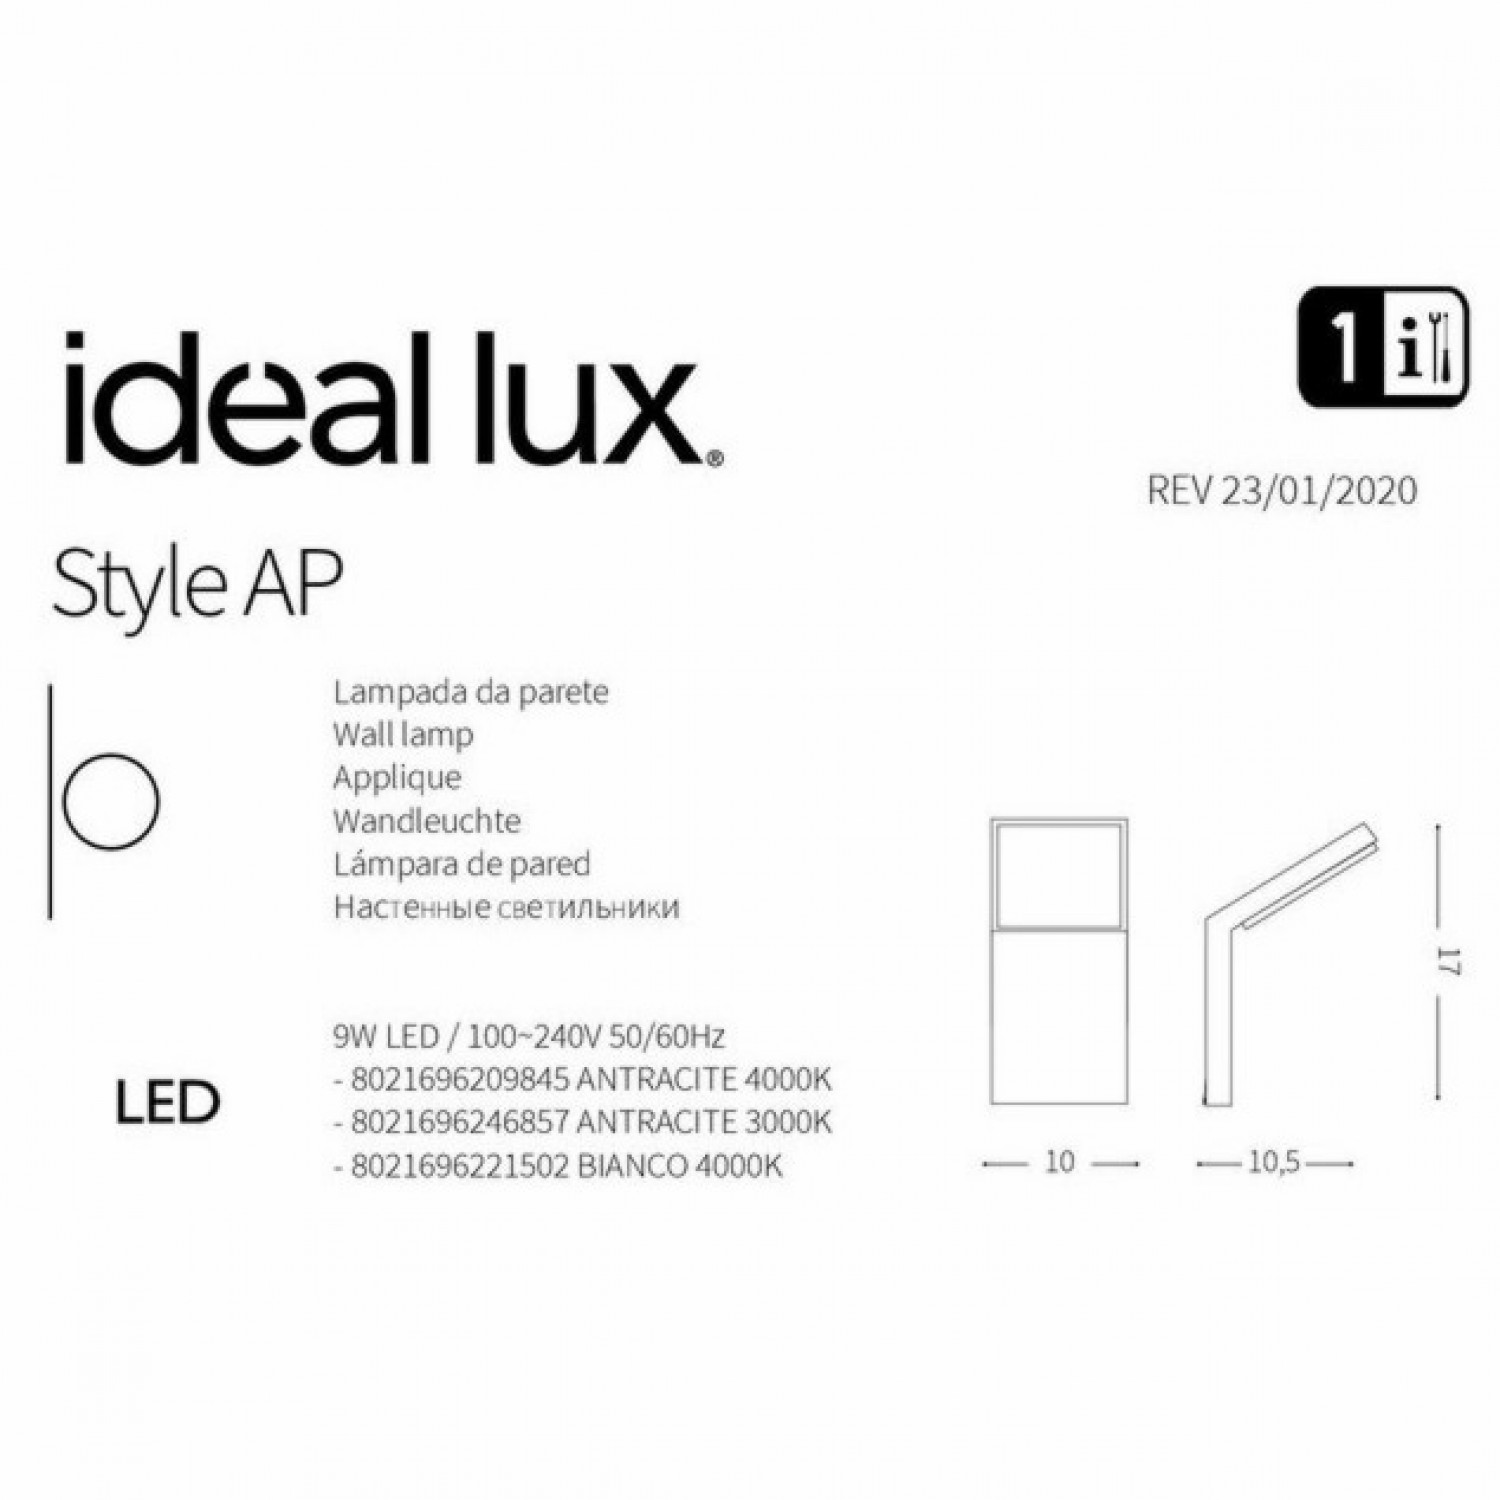 Бра Ideal Lux STYLE AP BIANCO 4000K 221502